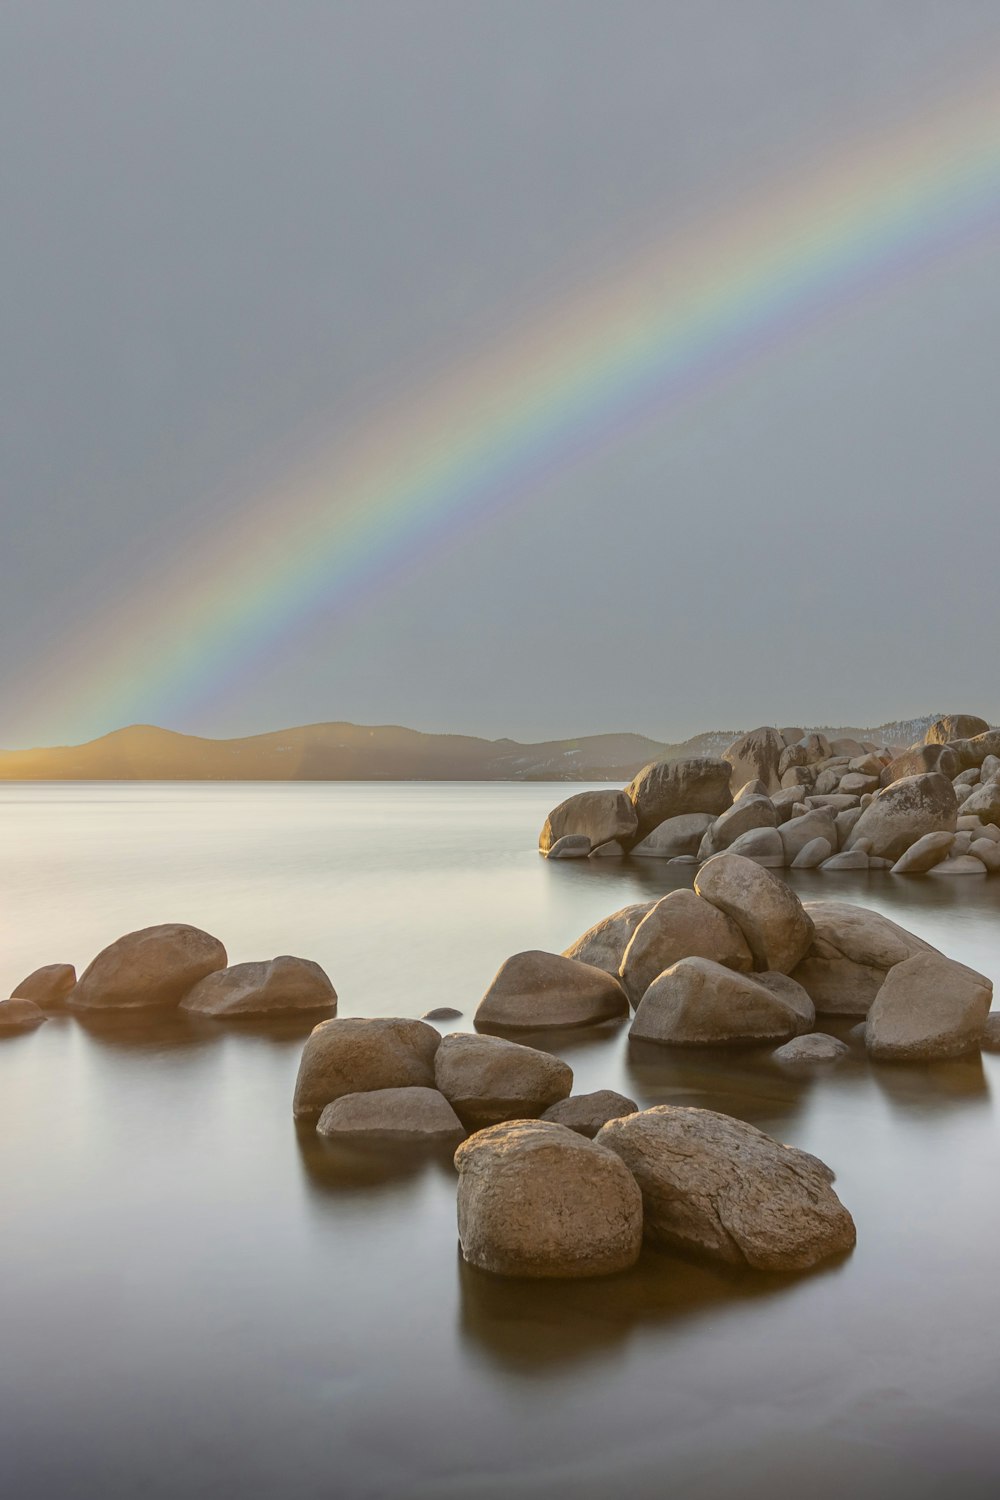 a rainbow shines in the sky over a body of water